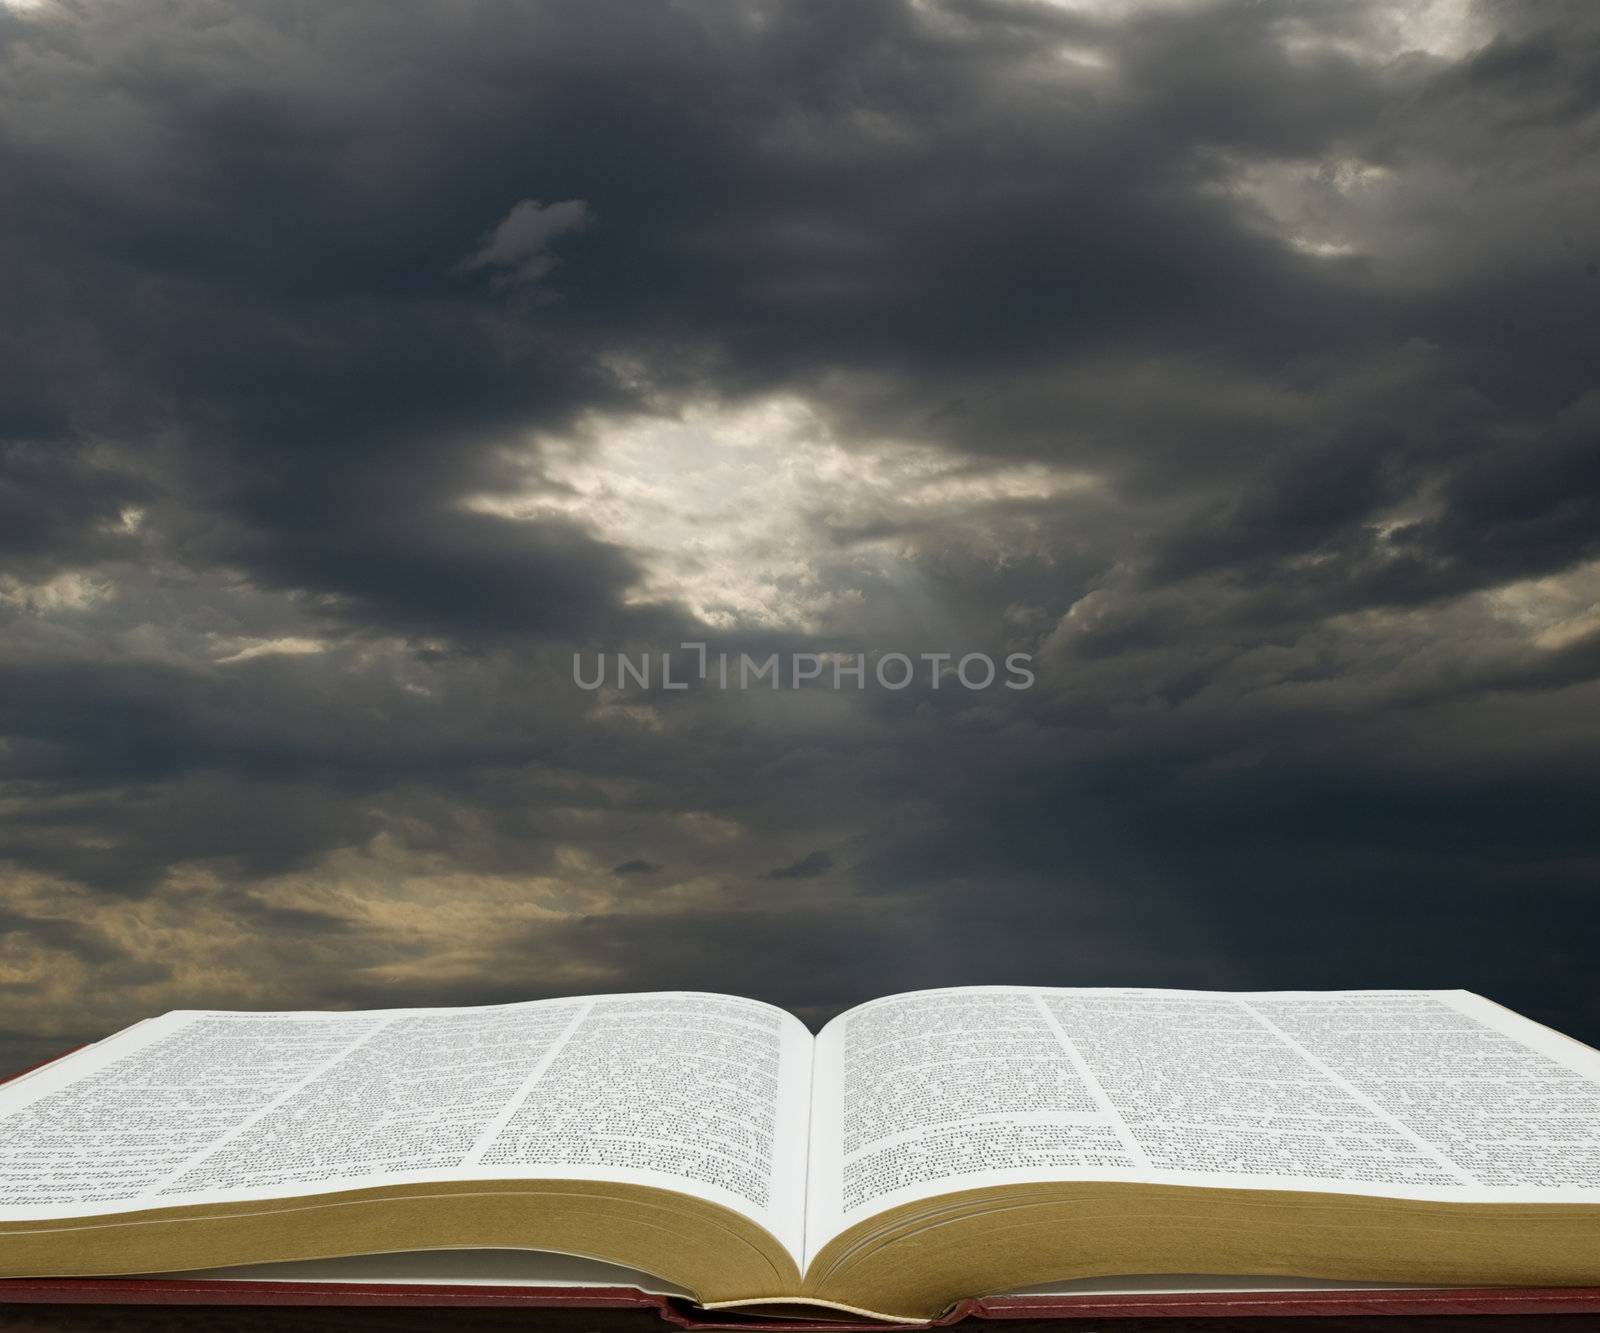 Light on the Bible by Gordo25